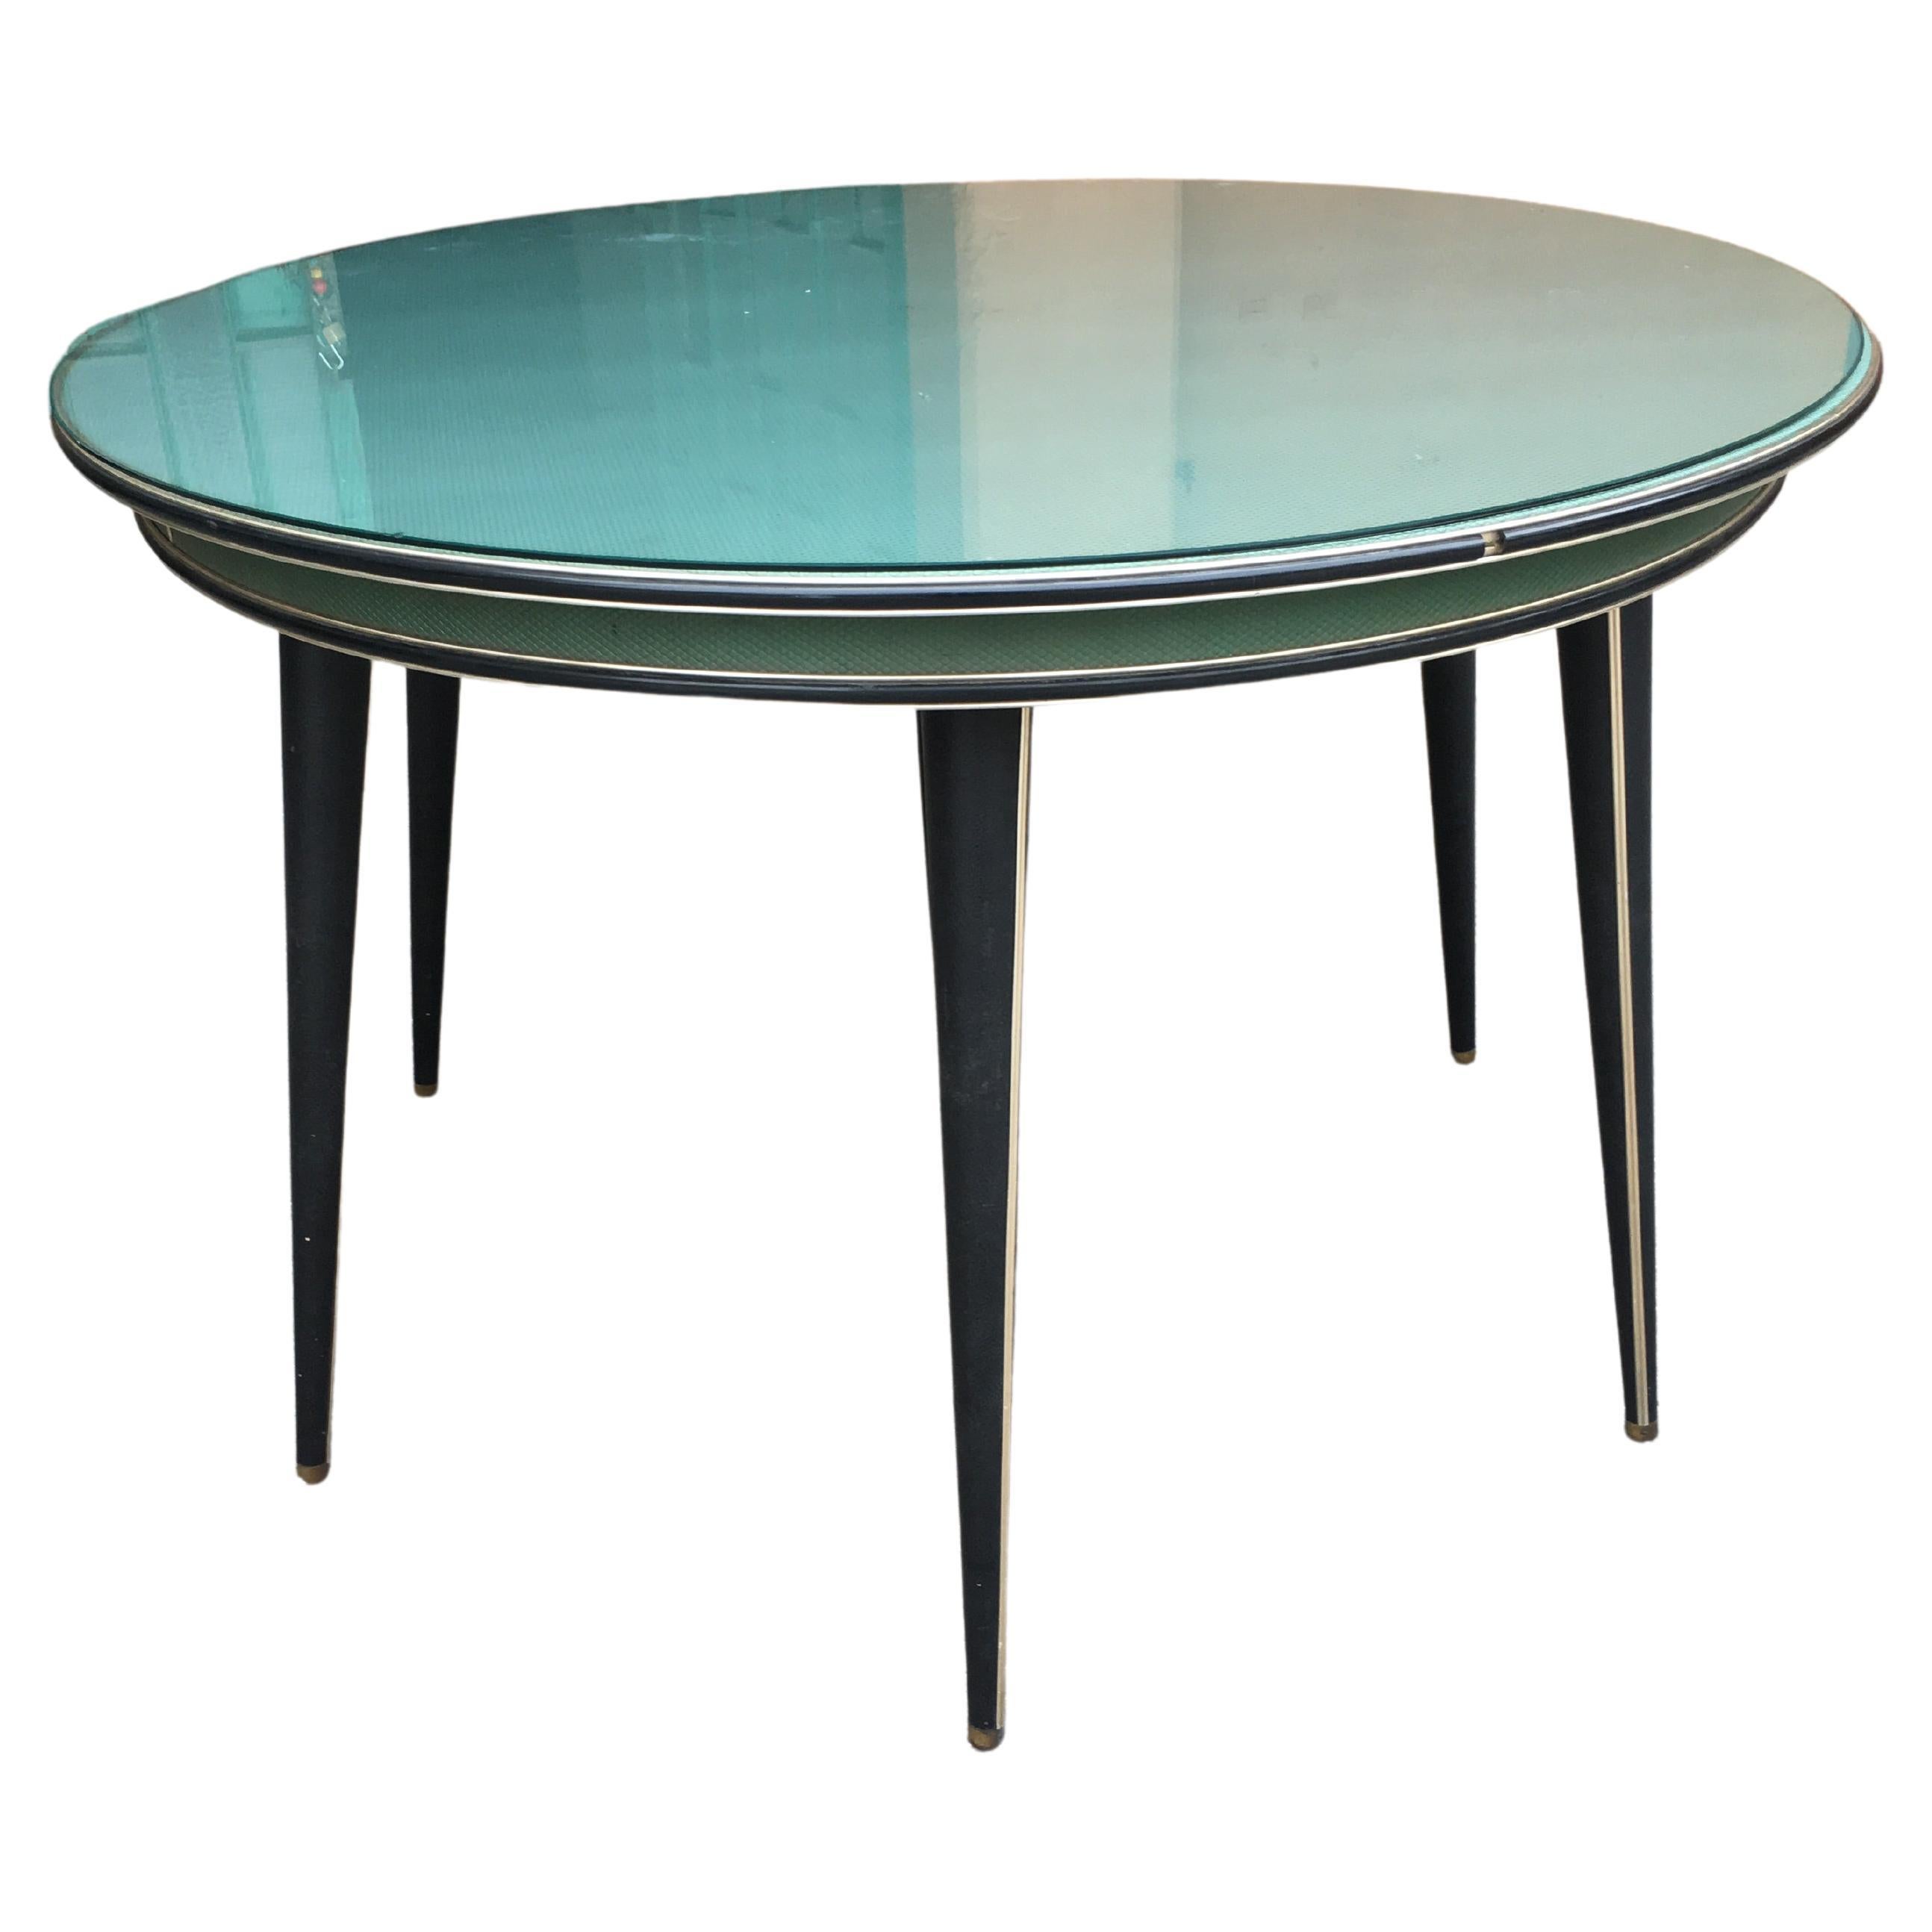 Mid-Century Modern Italian Umberto Mascagni Green and Black Round Table, 1960s For Sale